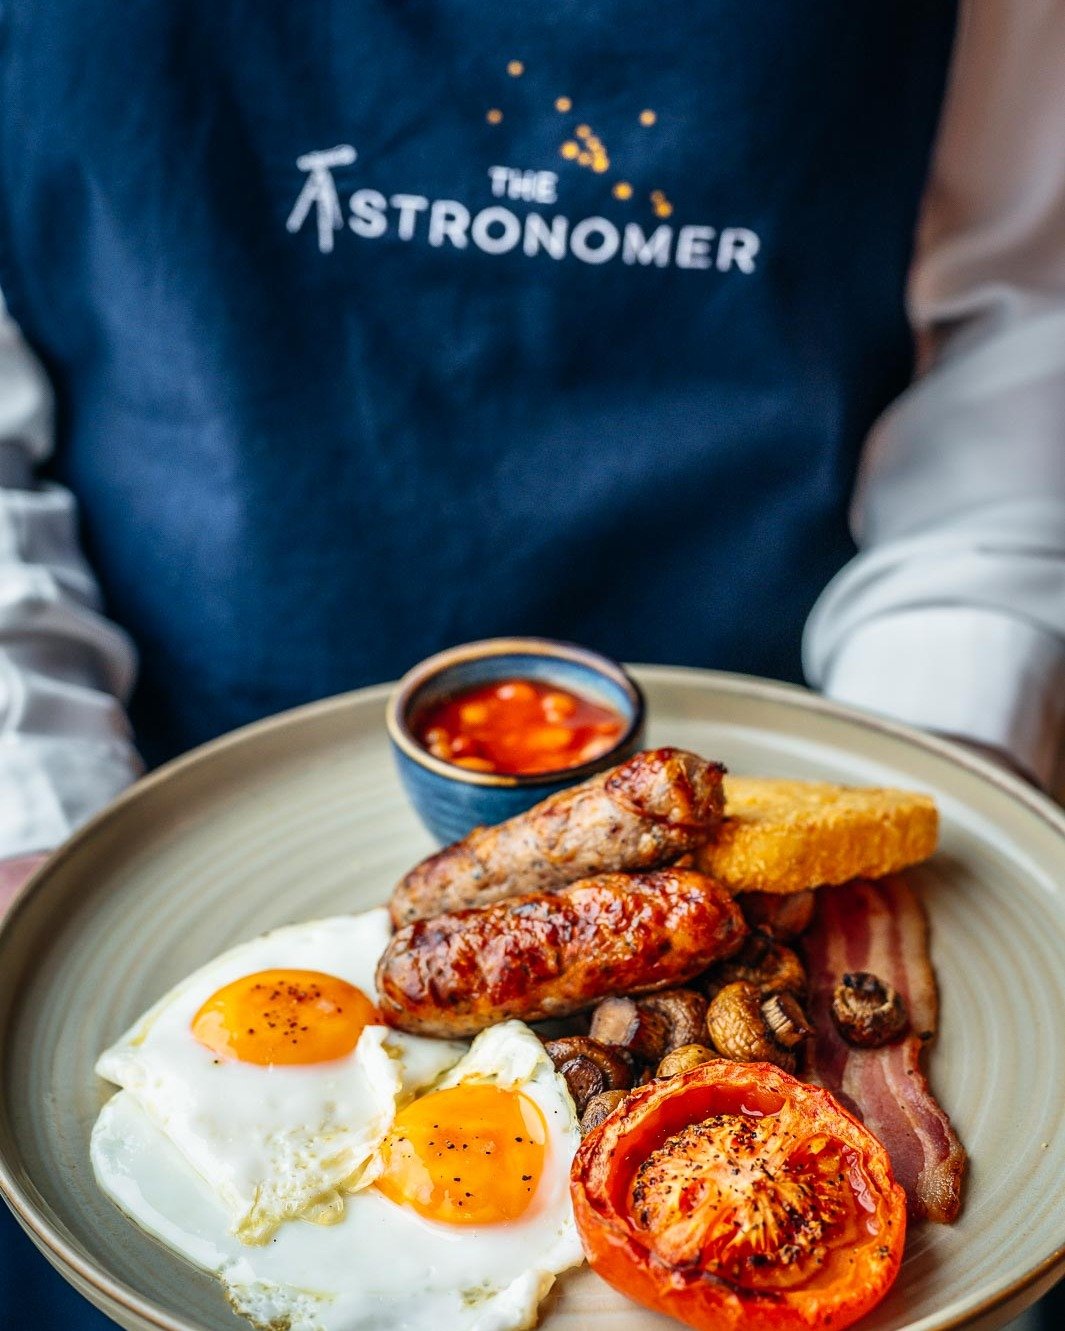 Serving breakfast seven days a week 🍳

Our breakfast isn't just for hotel guests - join us any day for a create your own full English and a range of &agrave; la carte menu offerings including smashed avocado and Eggs Royale.

Book in via our #linkin